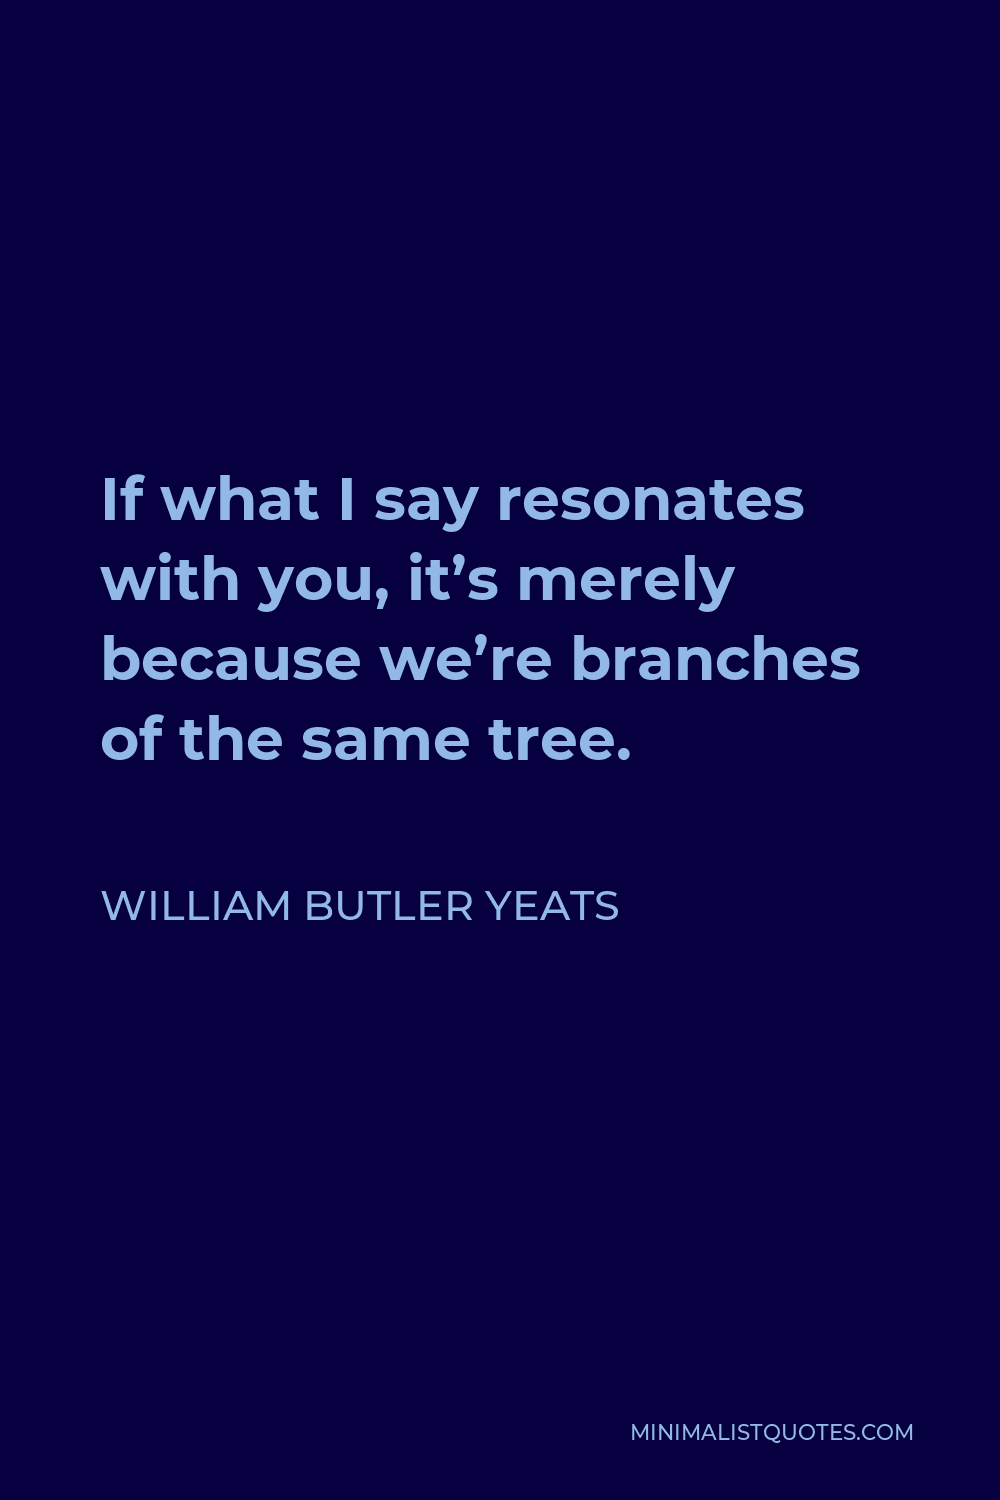 William Butler Yeats Quote - If what I say resonates with you, it’s merely because we’re branches of the same tree.